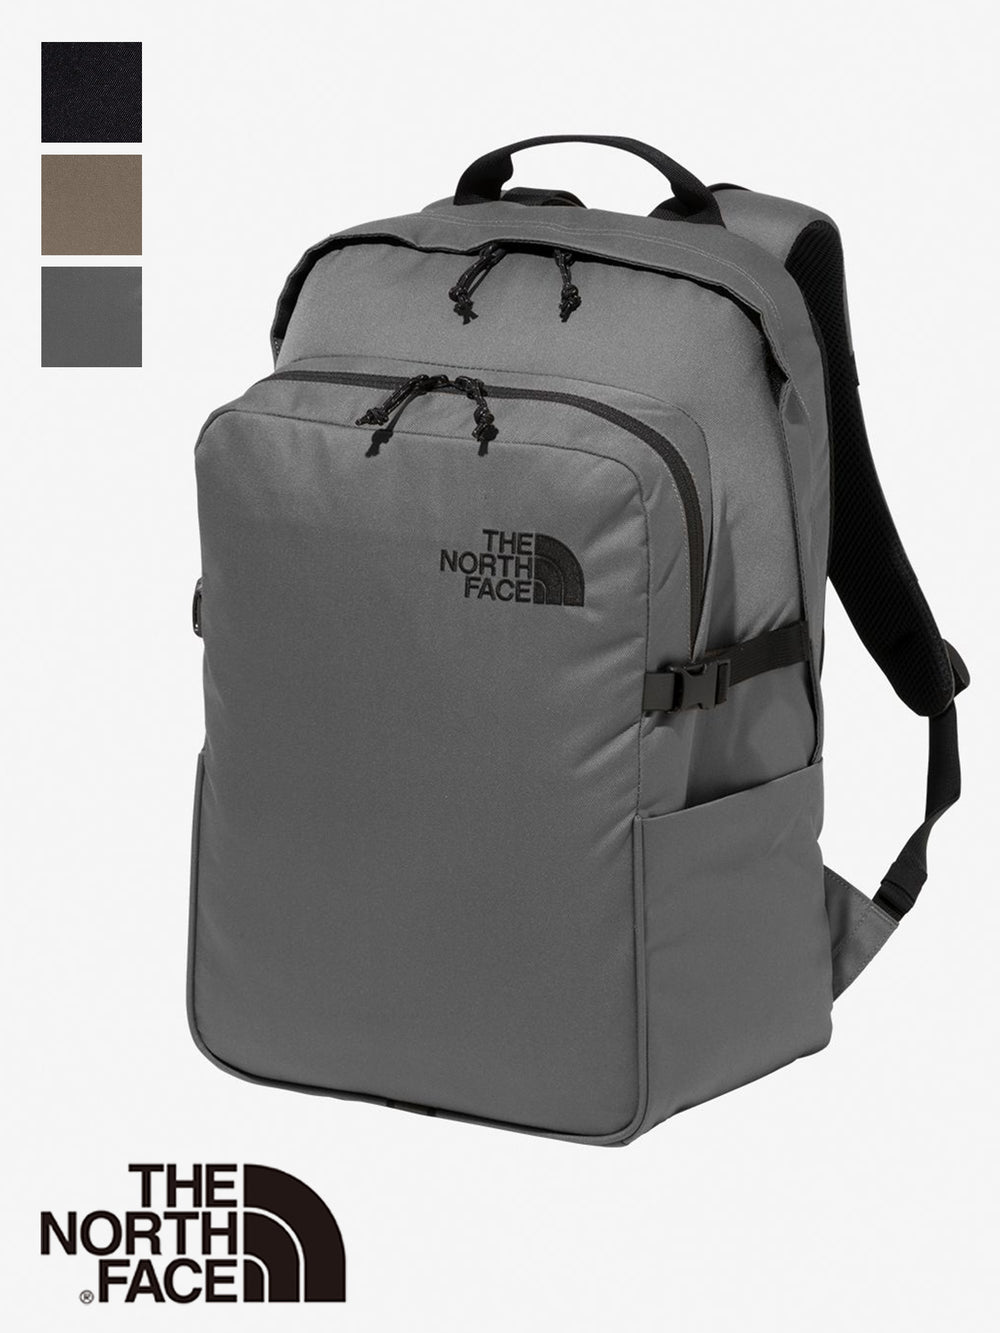 [SALE10%OFF][THE NORTH FACE] Boulder Daypack The North Face Unisex Outdoor Backpack Large Capacity Commuter / 23SS NM72250